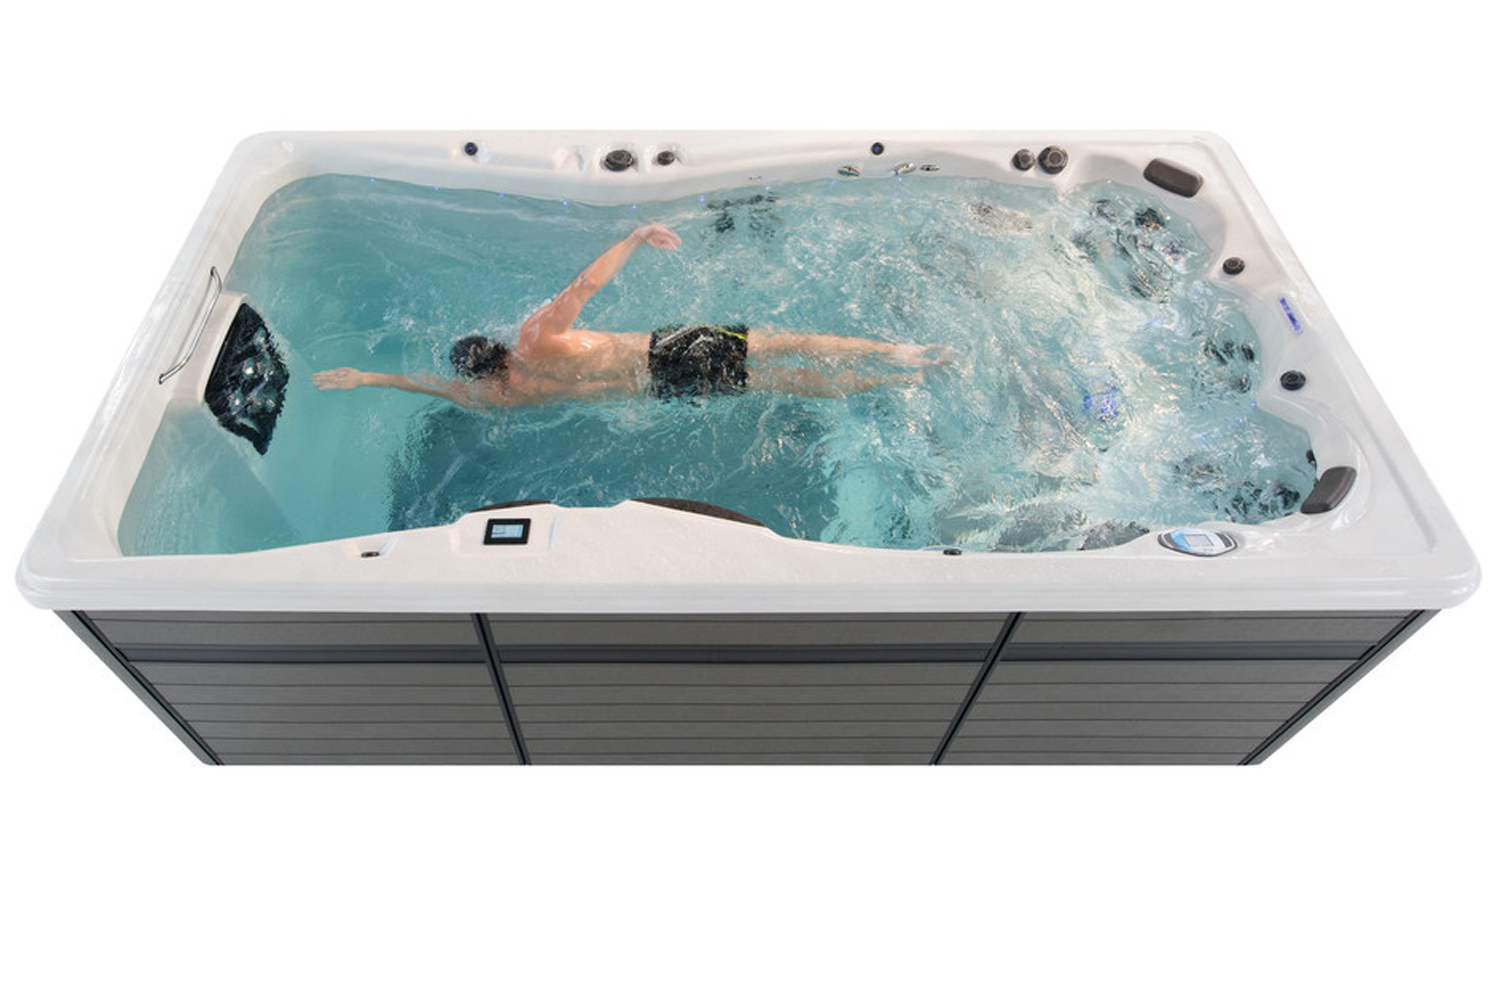 Master Spas designers changed the user interface to make operating a Master Spas hot tub or swim spa intuitive 